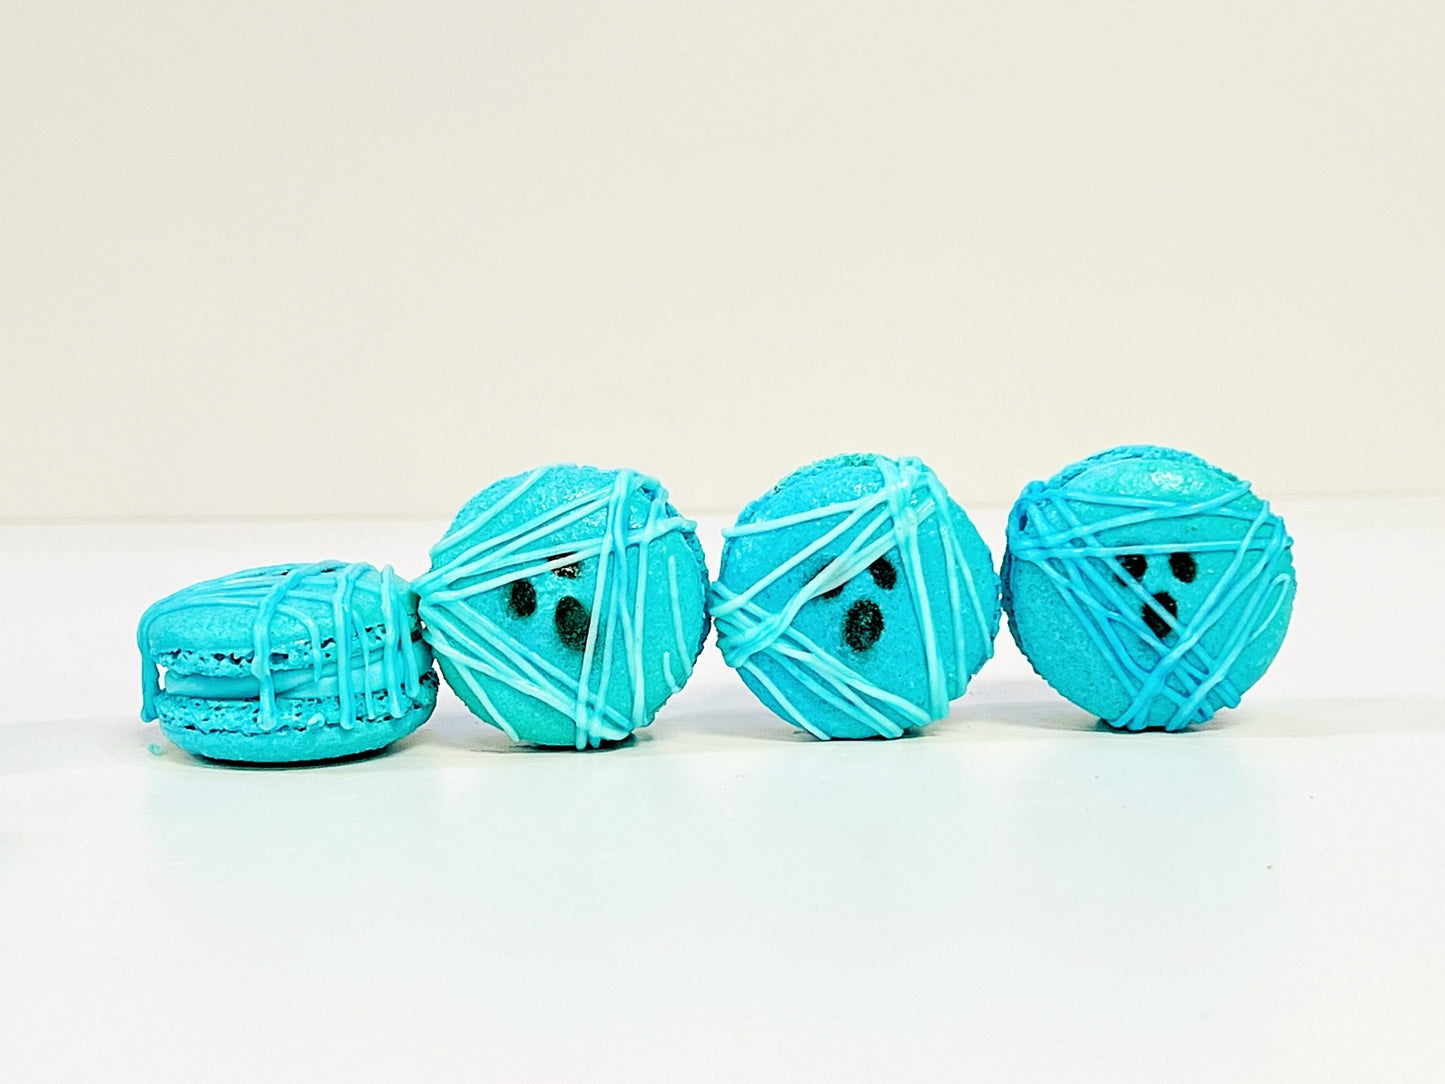 Mummy French Macarons (Blue) | Available in 6, 12 or 24 Pack - Macaron Centrale6 Pack